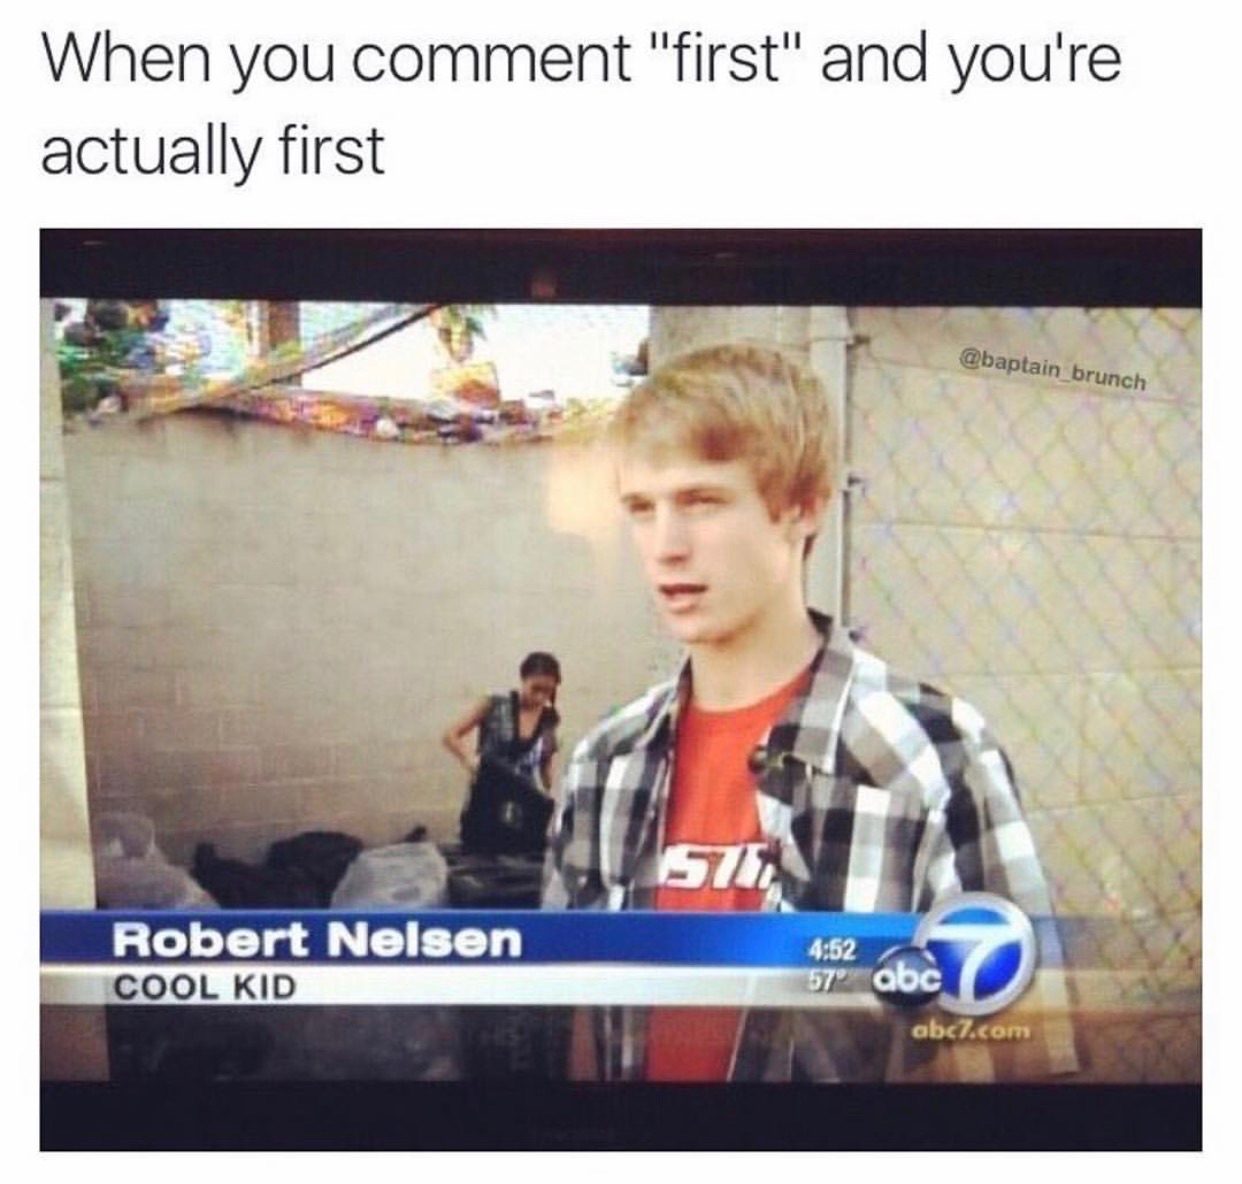 memes - cool kids memes - When you comment "first" and you're actually first Robert Nelsen Cool Kid 57 abc abc7.com